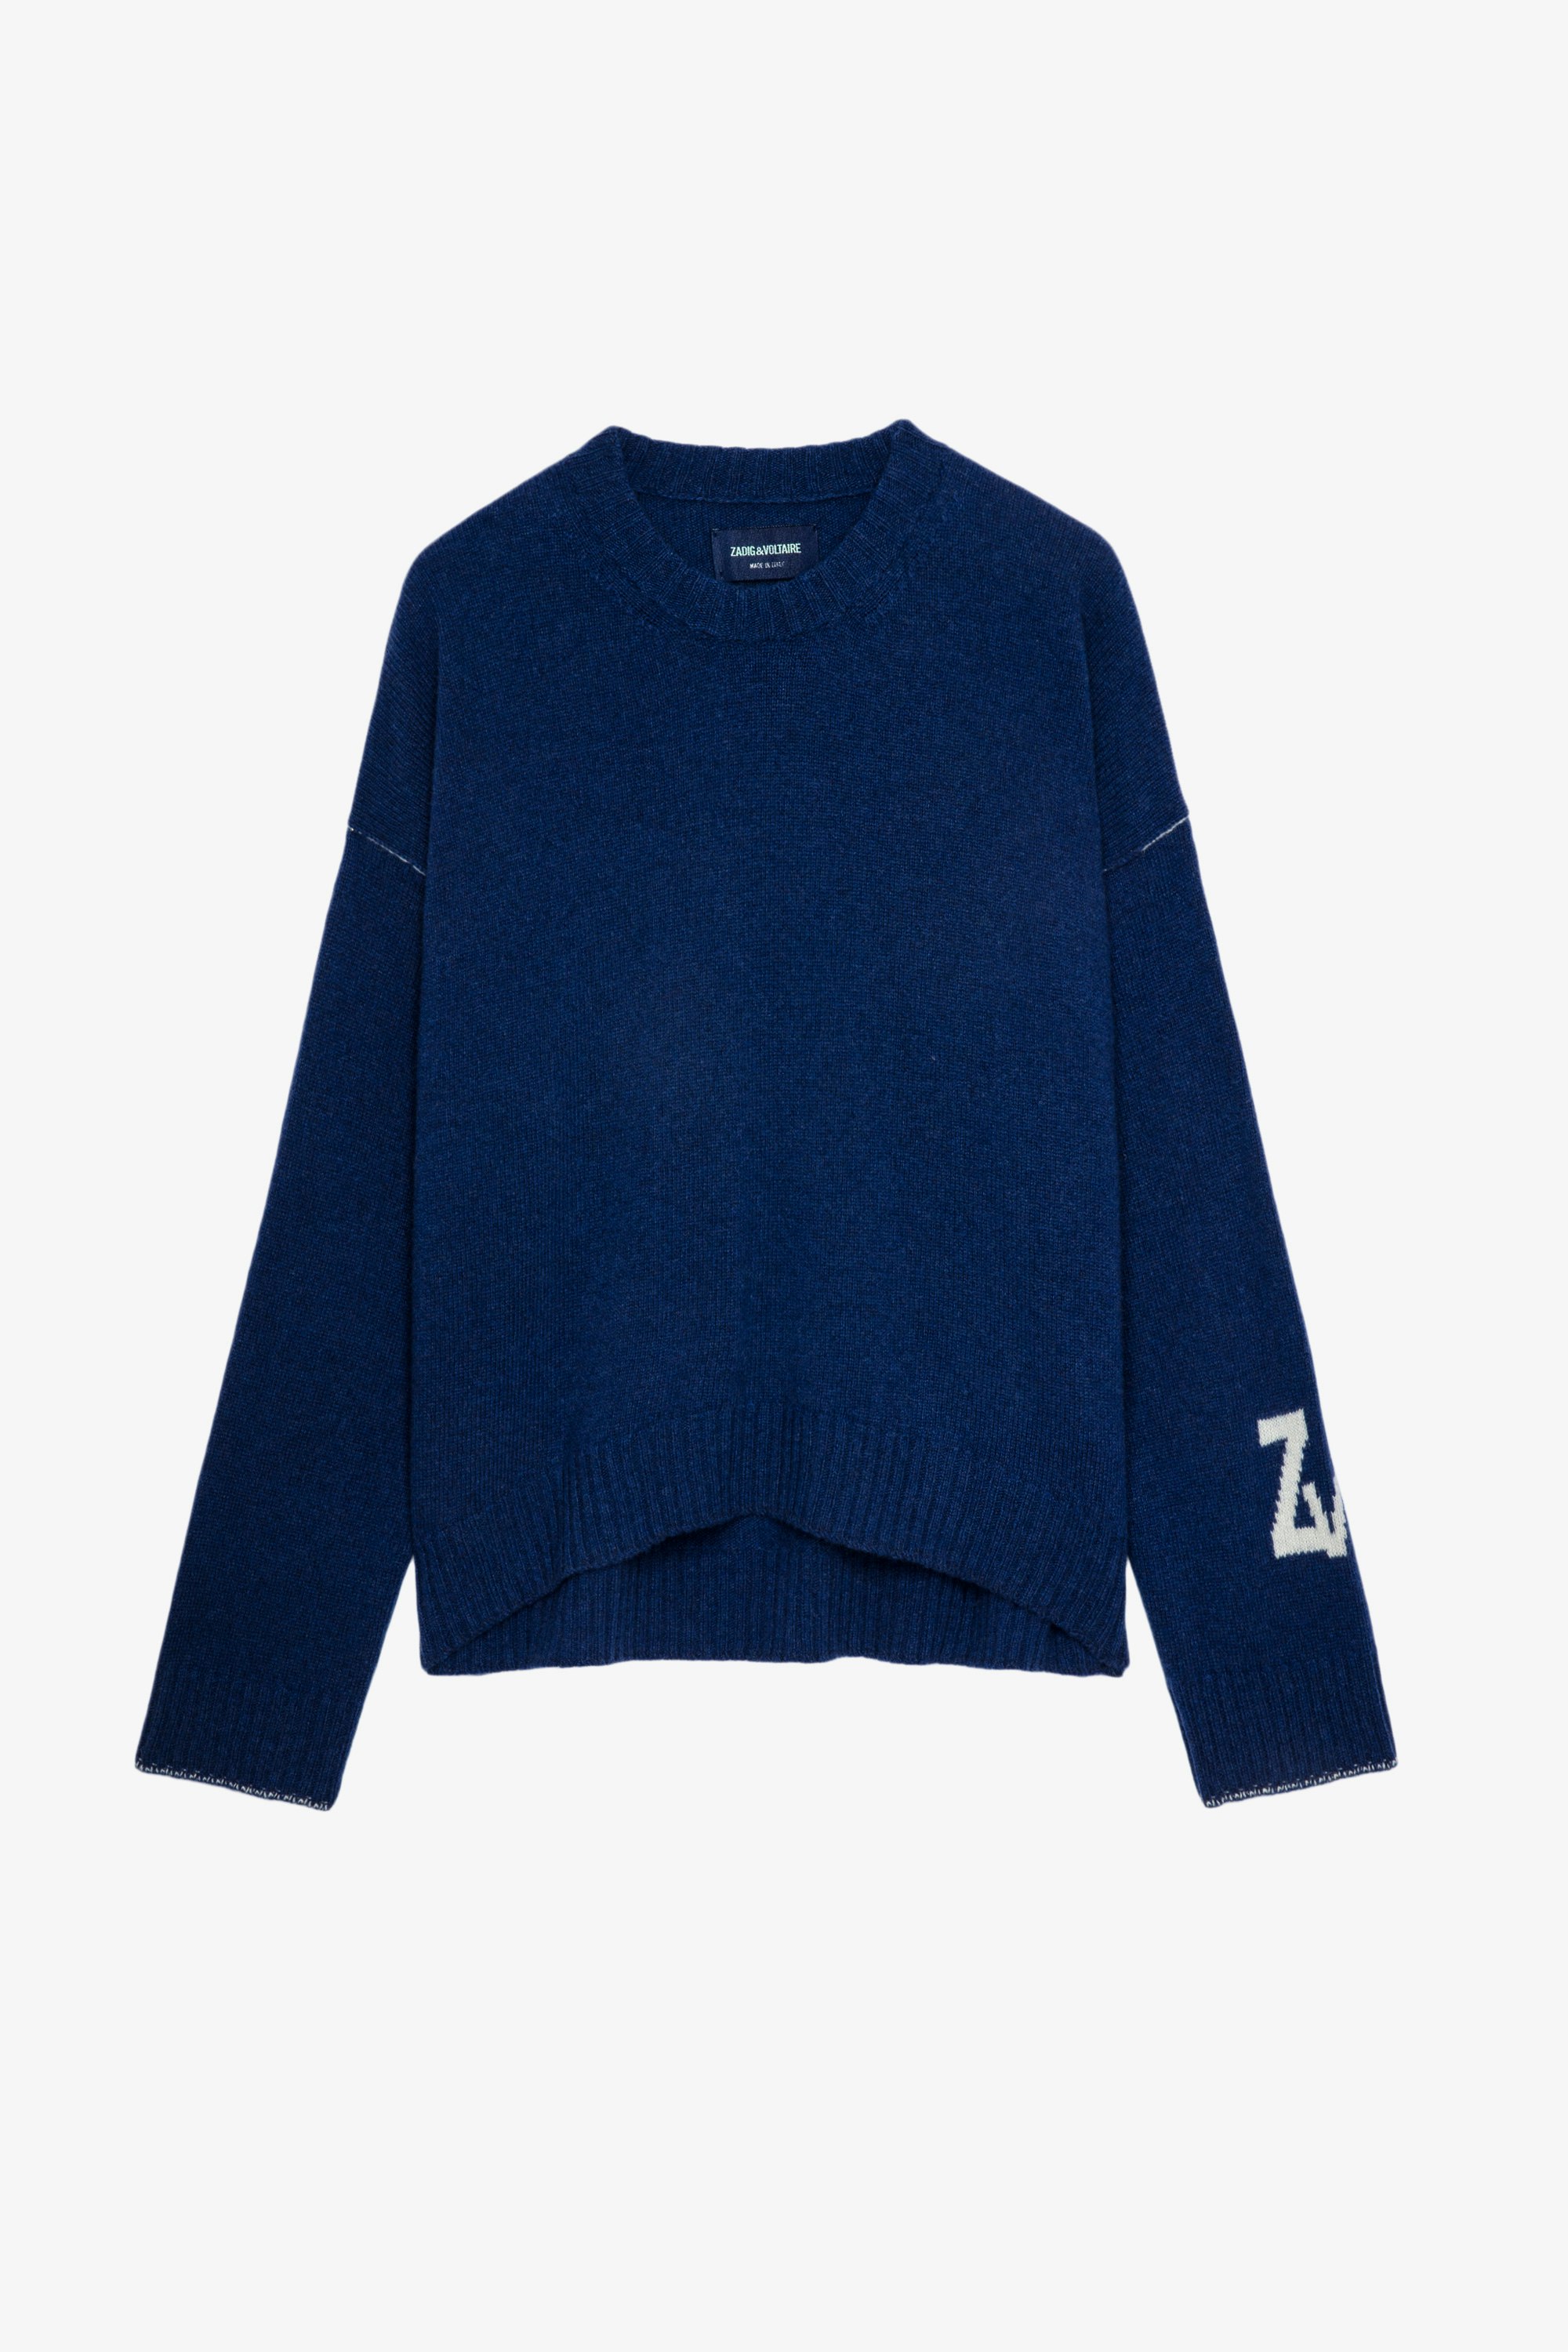 Markus Jumper Women’s blue knit jumper with ZV signature on the sleeve